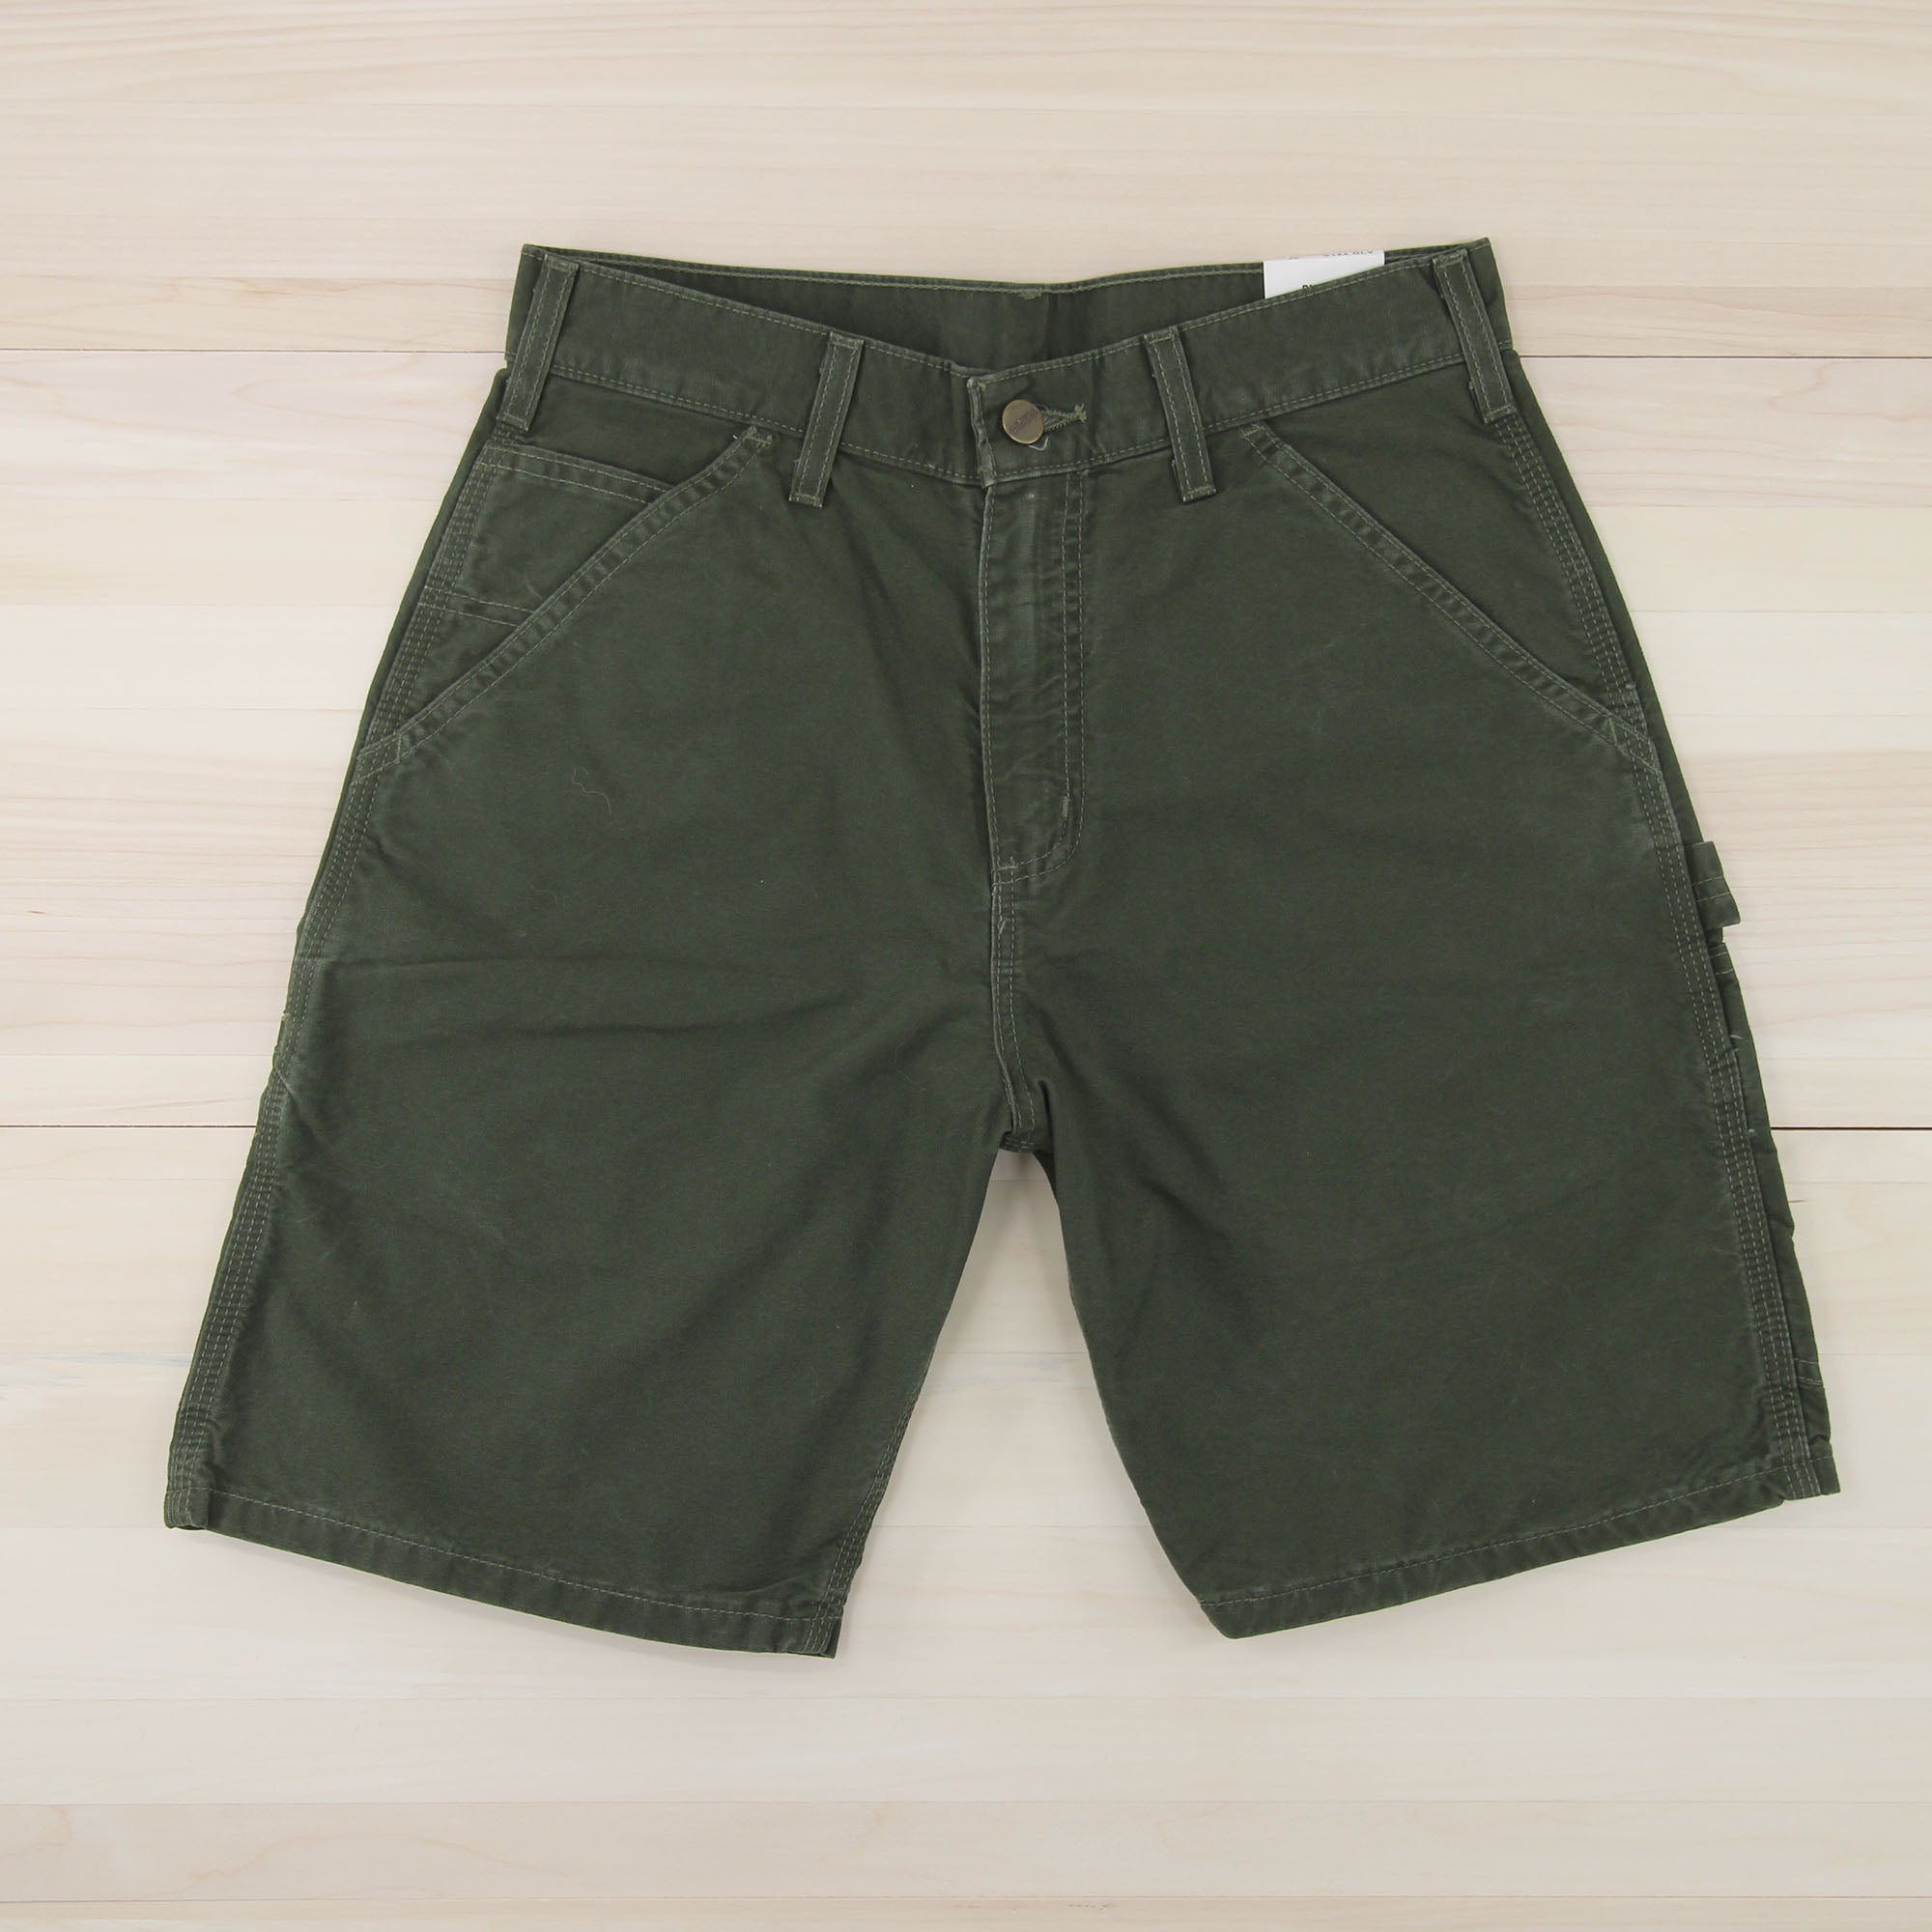 Men's Vintage Carhartt B144 OLV Relaxed Fit Work Shorts NWT - Various Sizes Available Great Lakes Reclaimed Denim